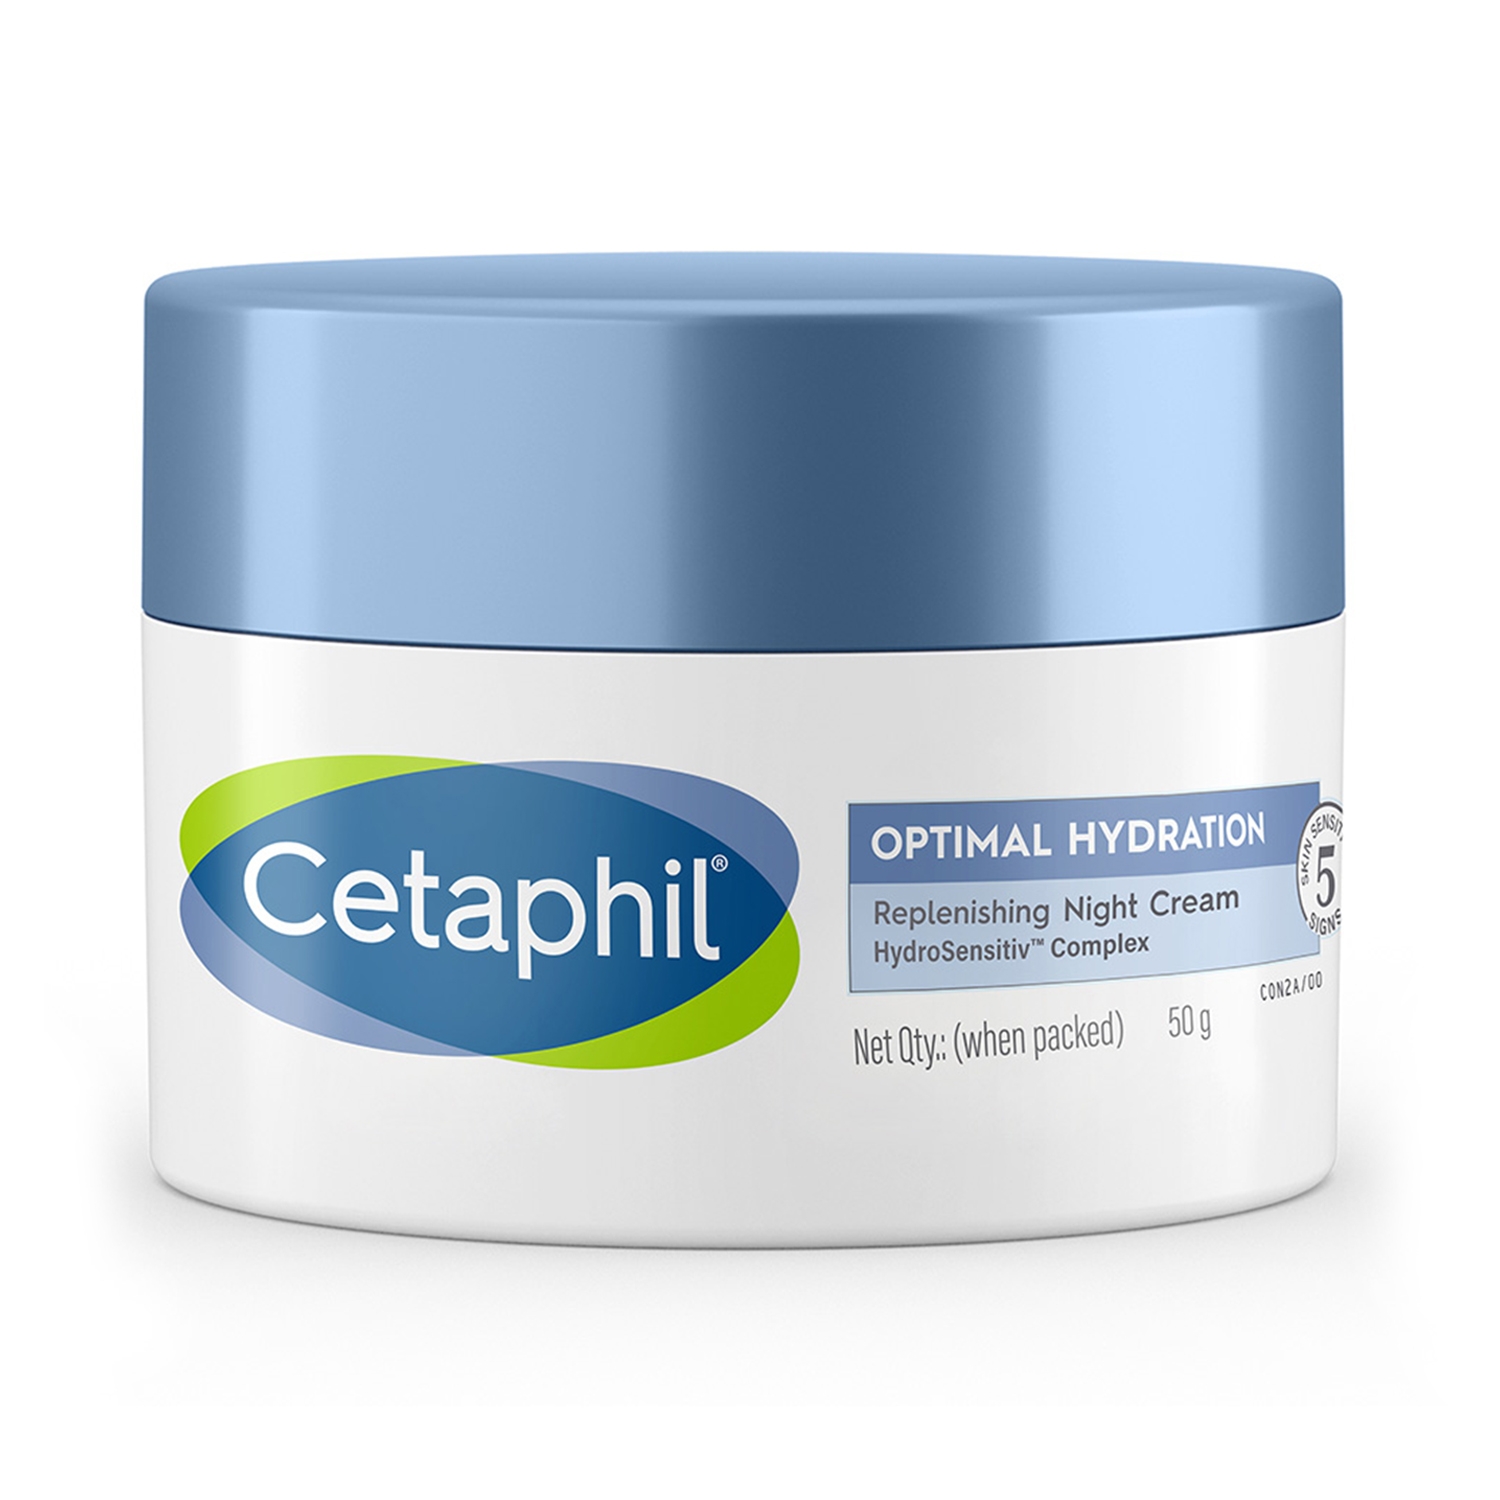 Cetaphil | Cetaphil Optimal Hydration Replenishing Night Cream with Hyaluronic Acid For Dehydrated Skin (50g)